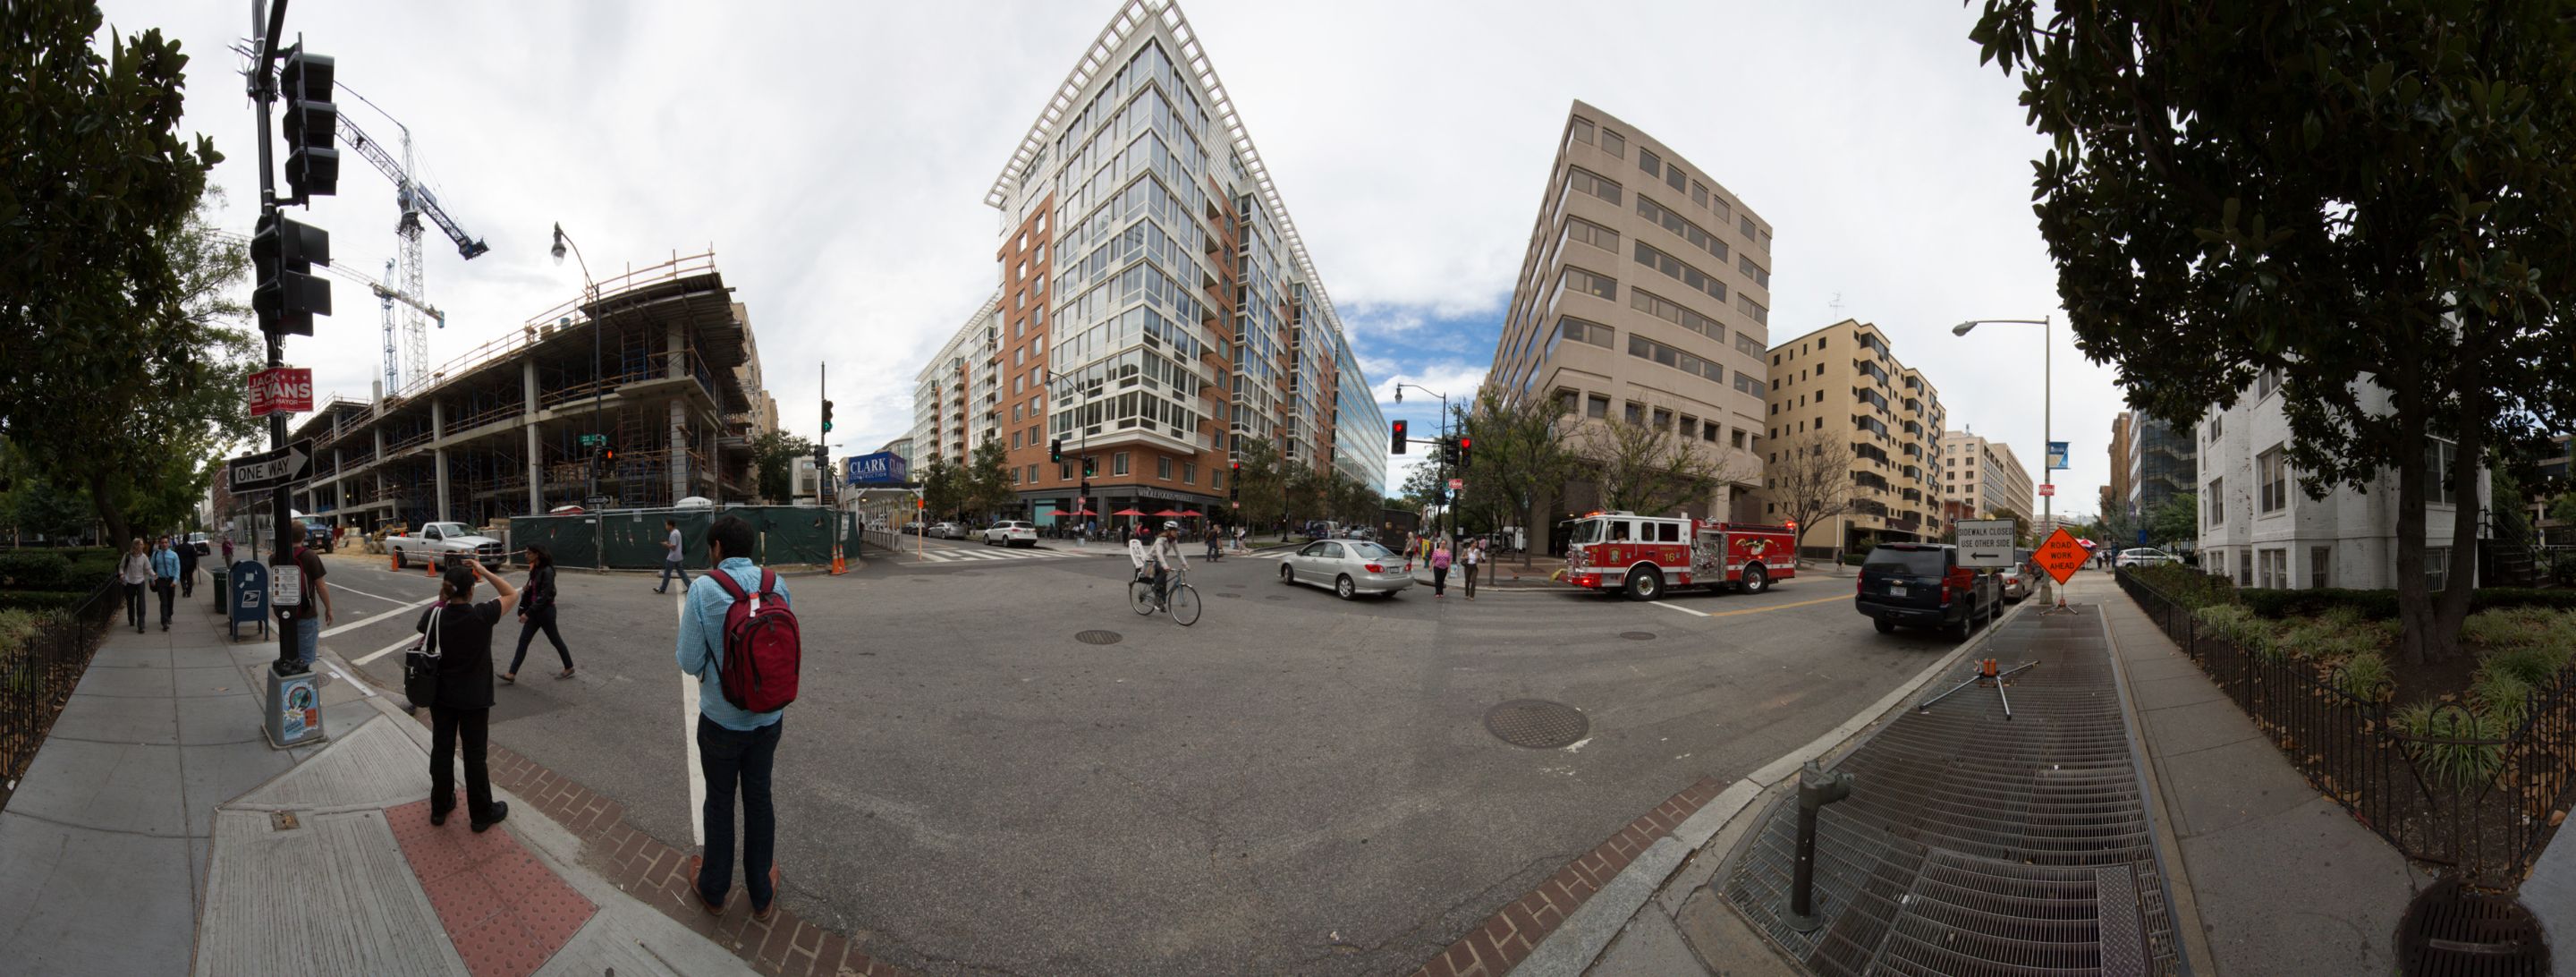 A panoramic view of buildings at the corner of 22nd and I streets.